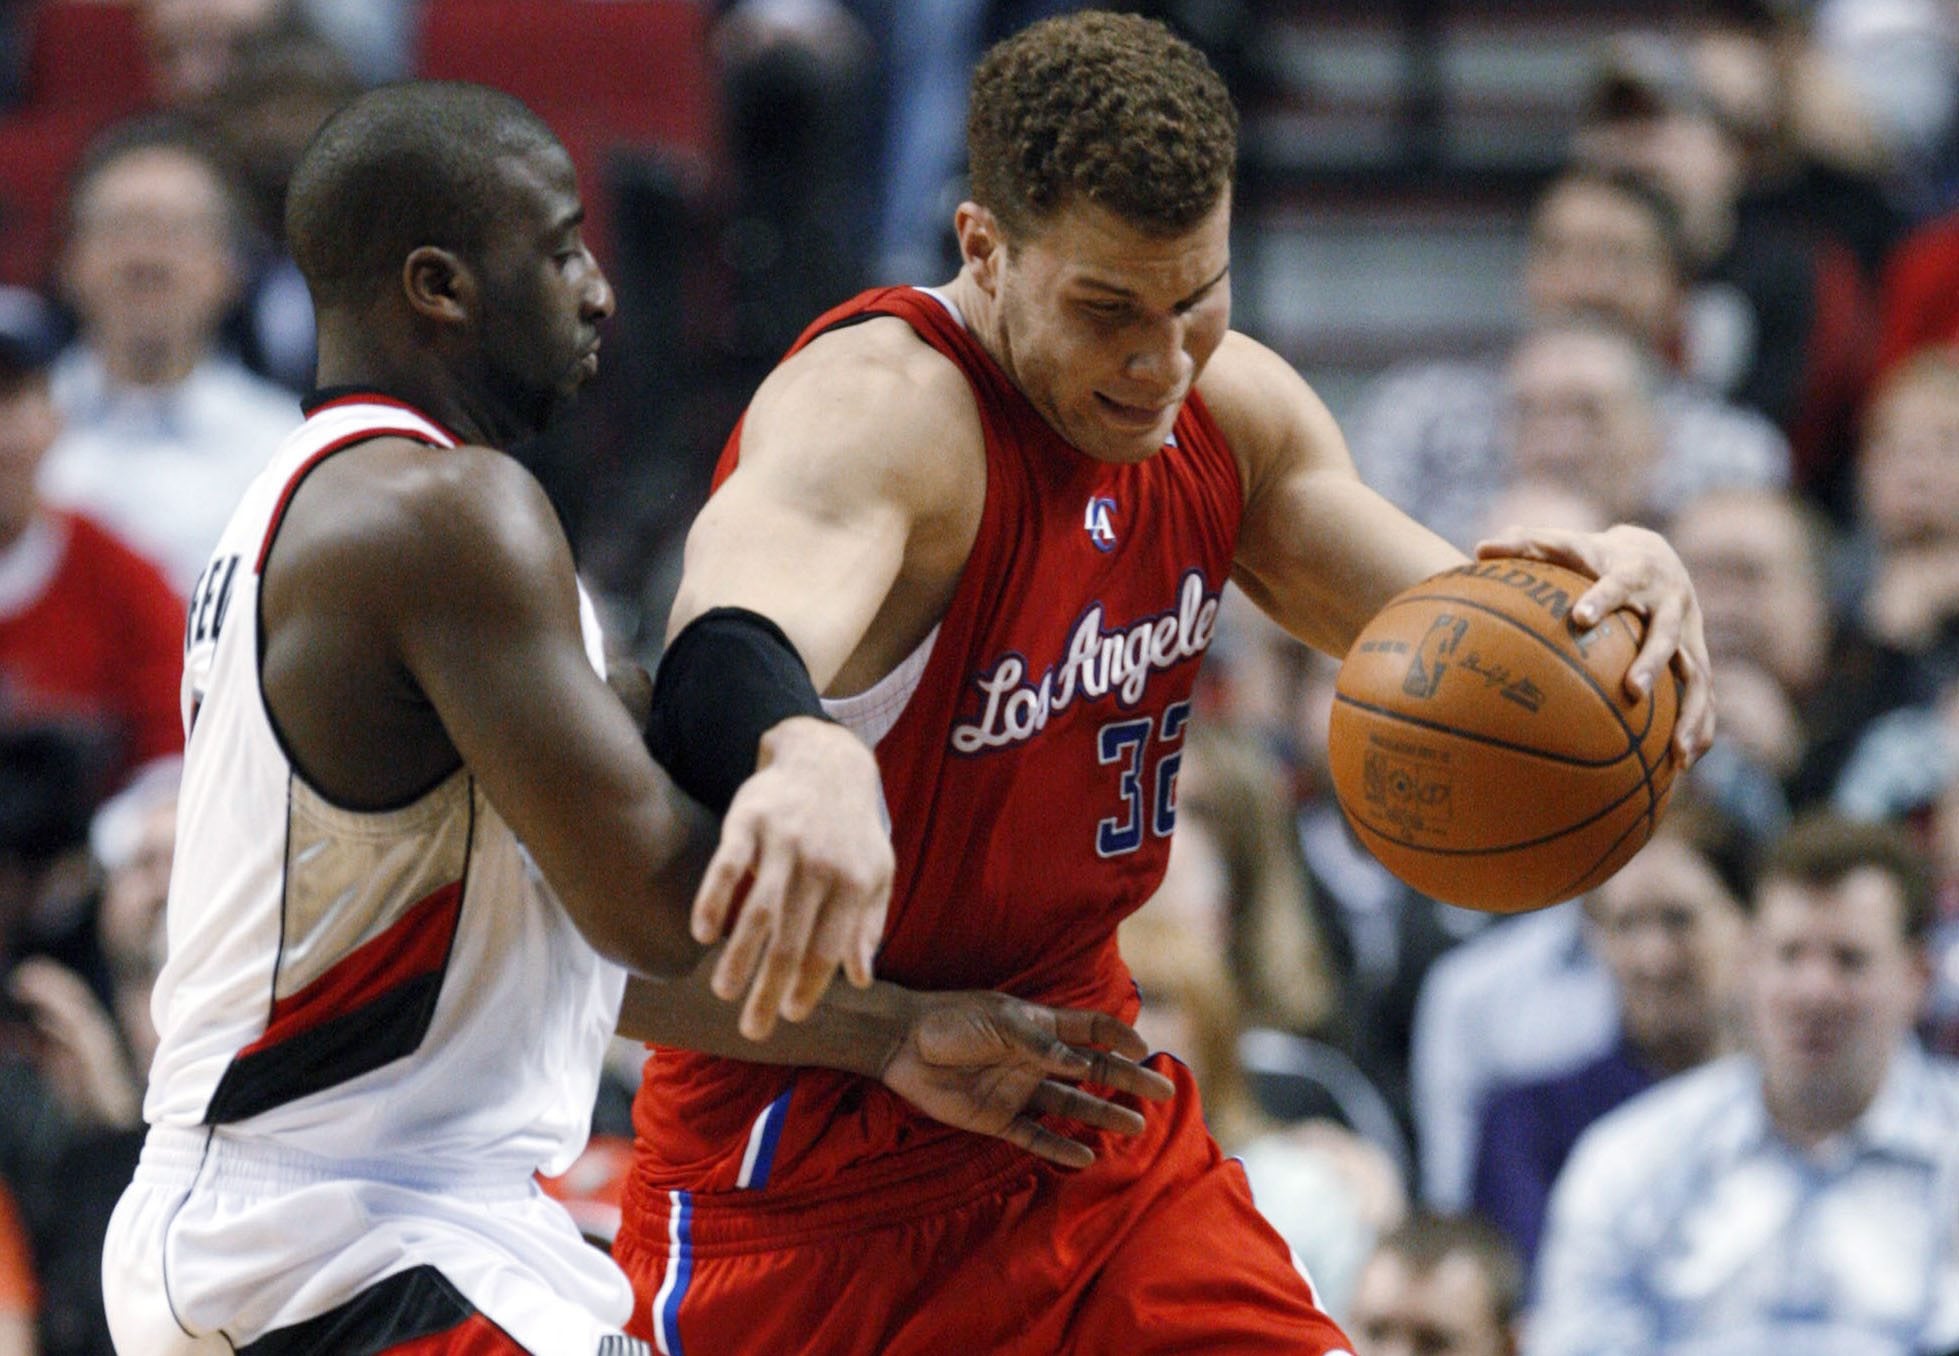 Los Angeles Clippers' Blake Griffin (32) drives past Portland Trail Blazers' Raymond Felton (5) in the second quarter of an NBA basketball game Thursday, Feb. 16, 2012, in Portland, Ore.